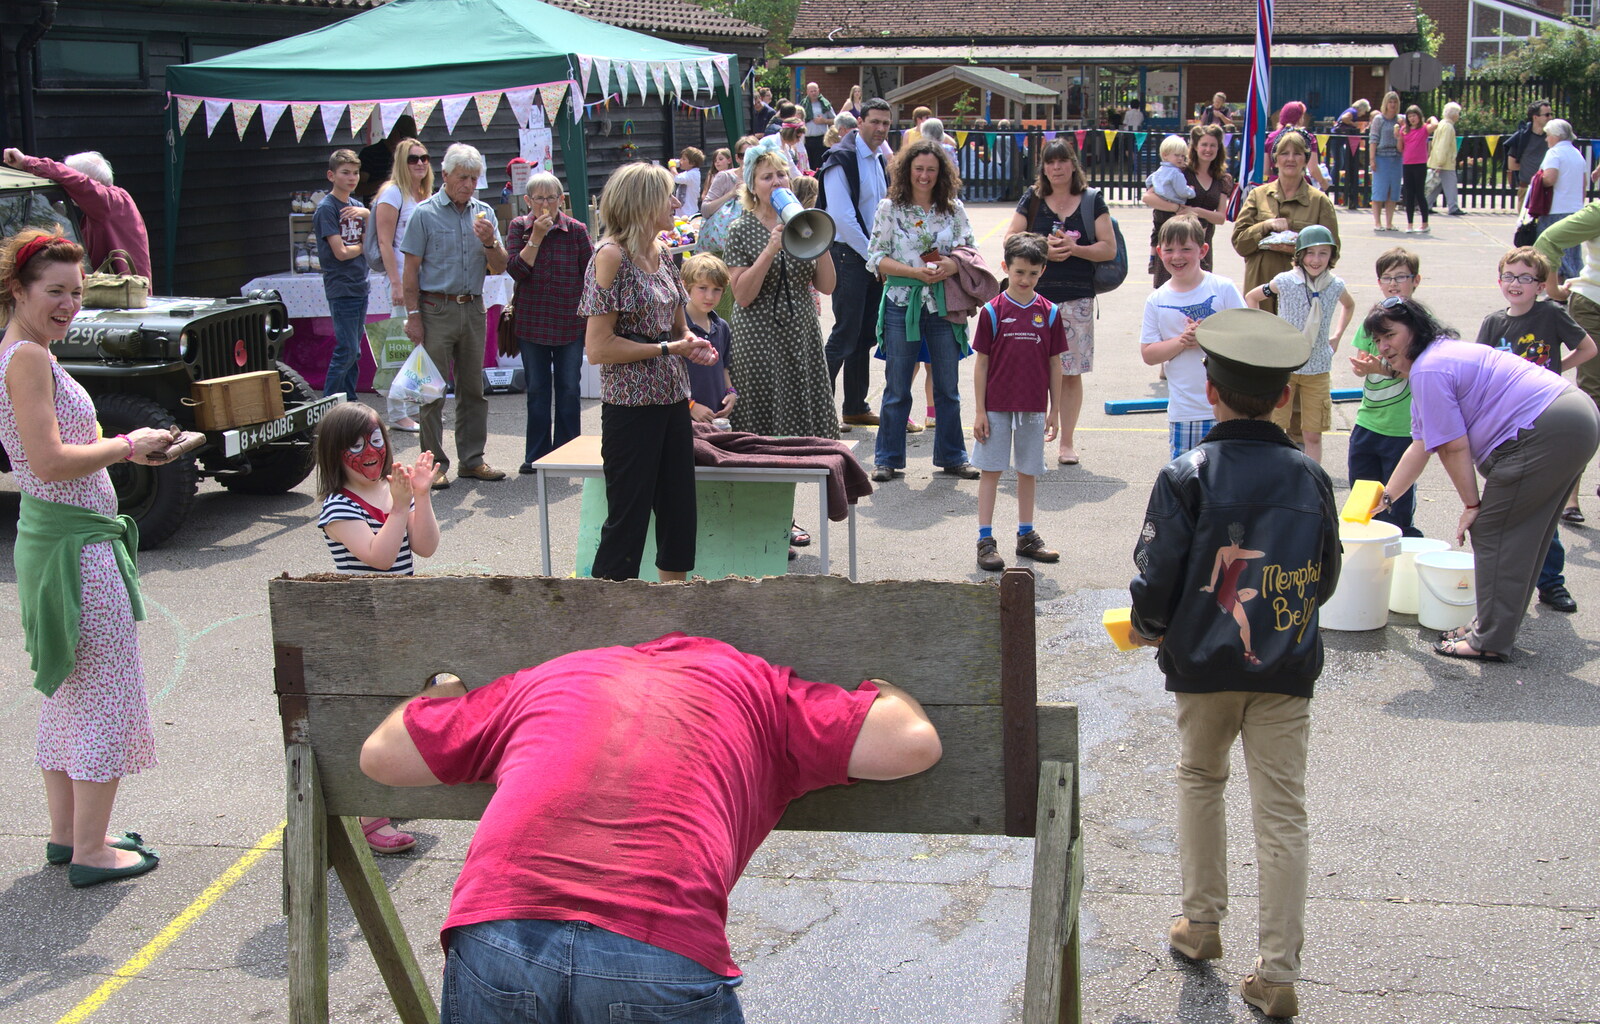 More wet sponging action from St. Peter and St. Paul's School Summer Fete, Eye, Suffolk - 12th July 2014